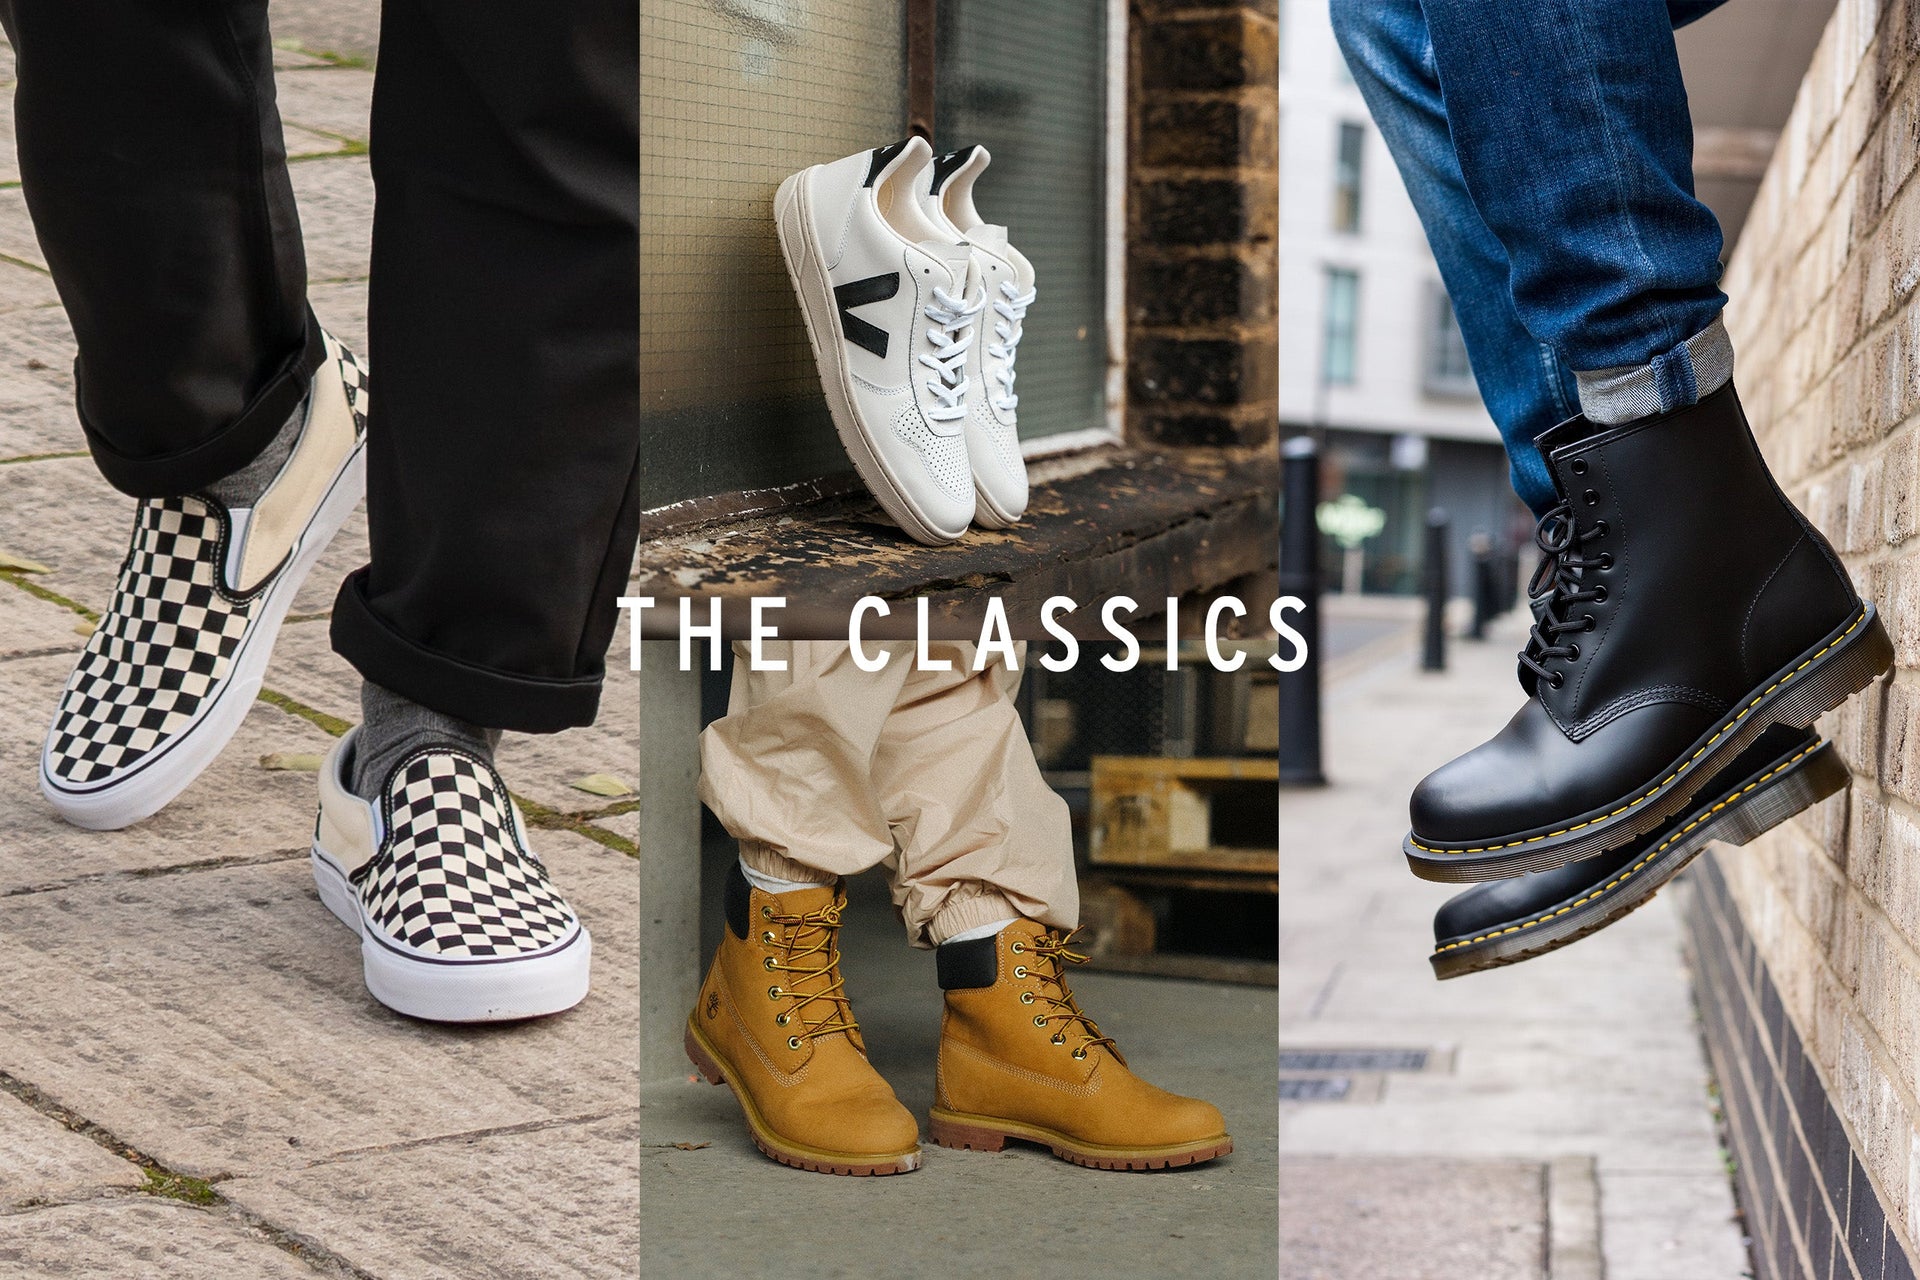 Drawing the line: INVEST IN THE CLASSICS